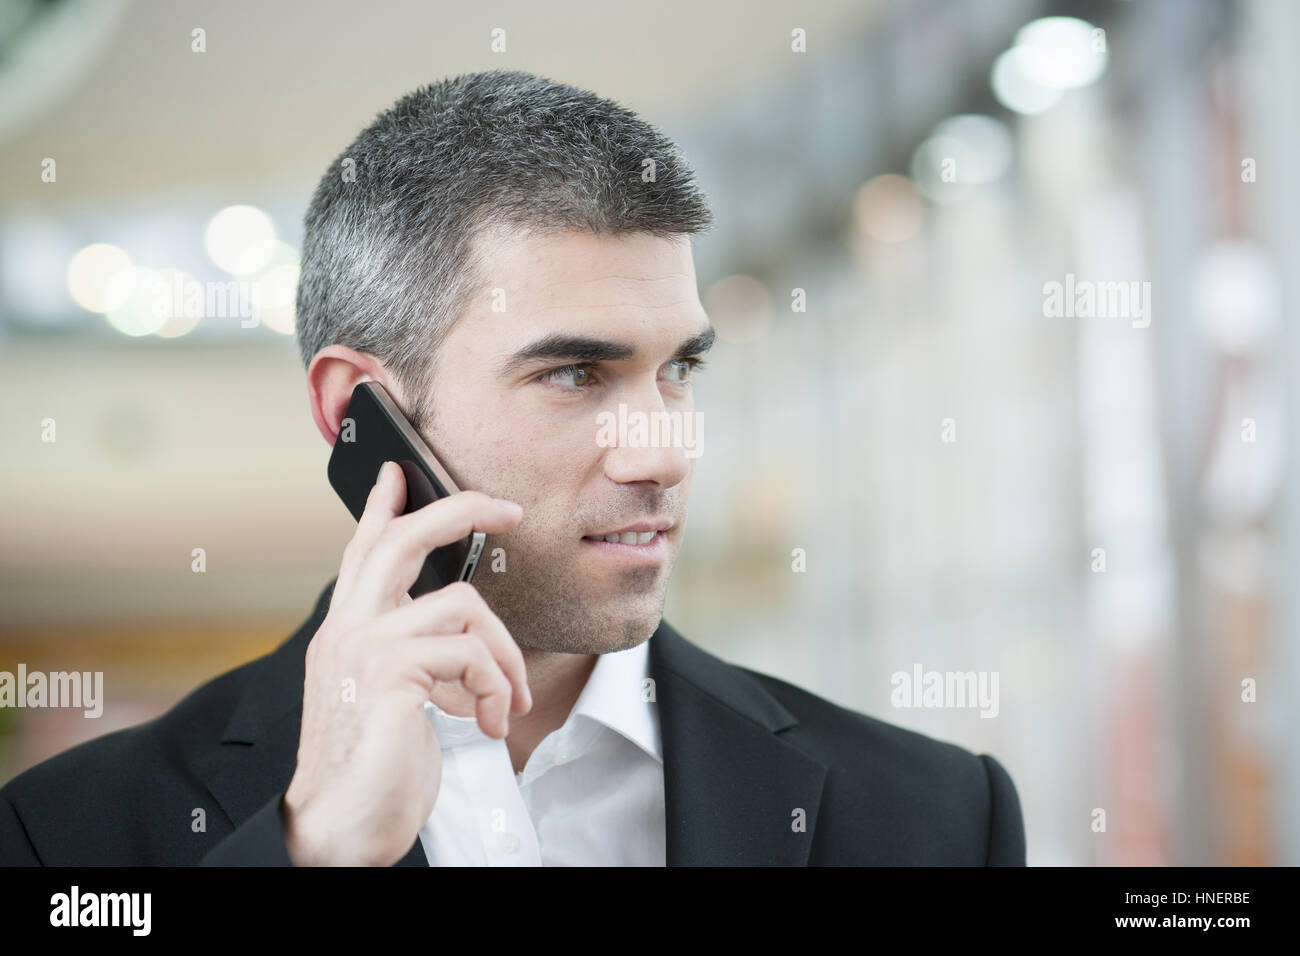 Close-up of businessman on mobile phone Banque D'Images